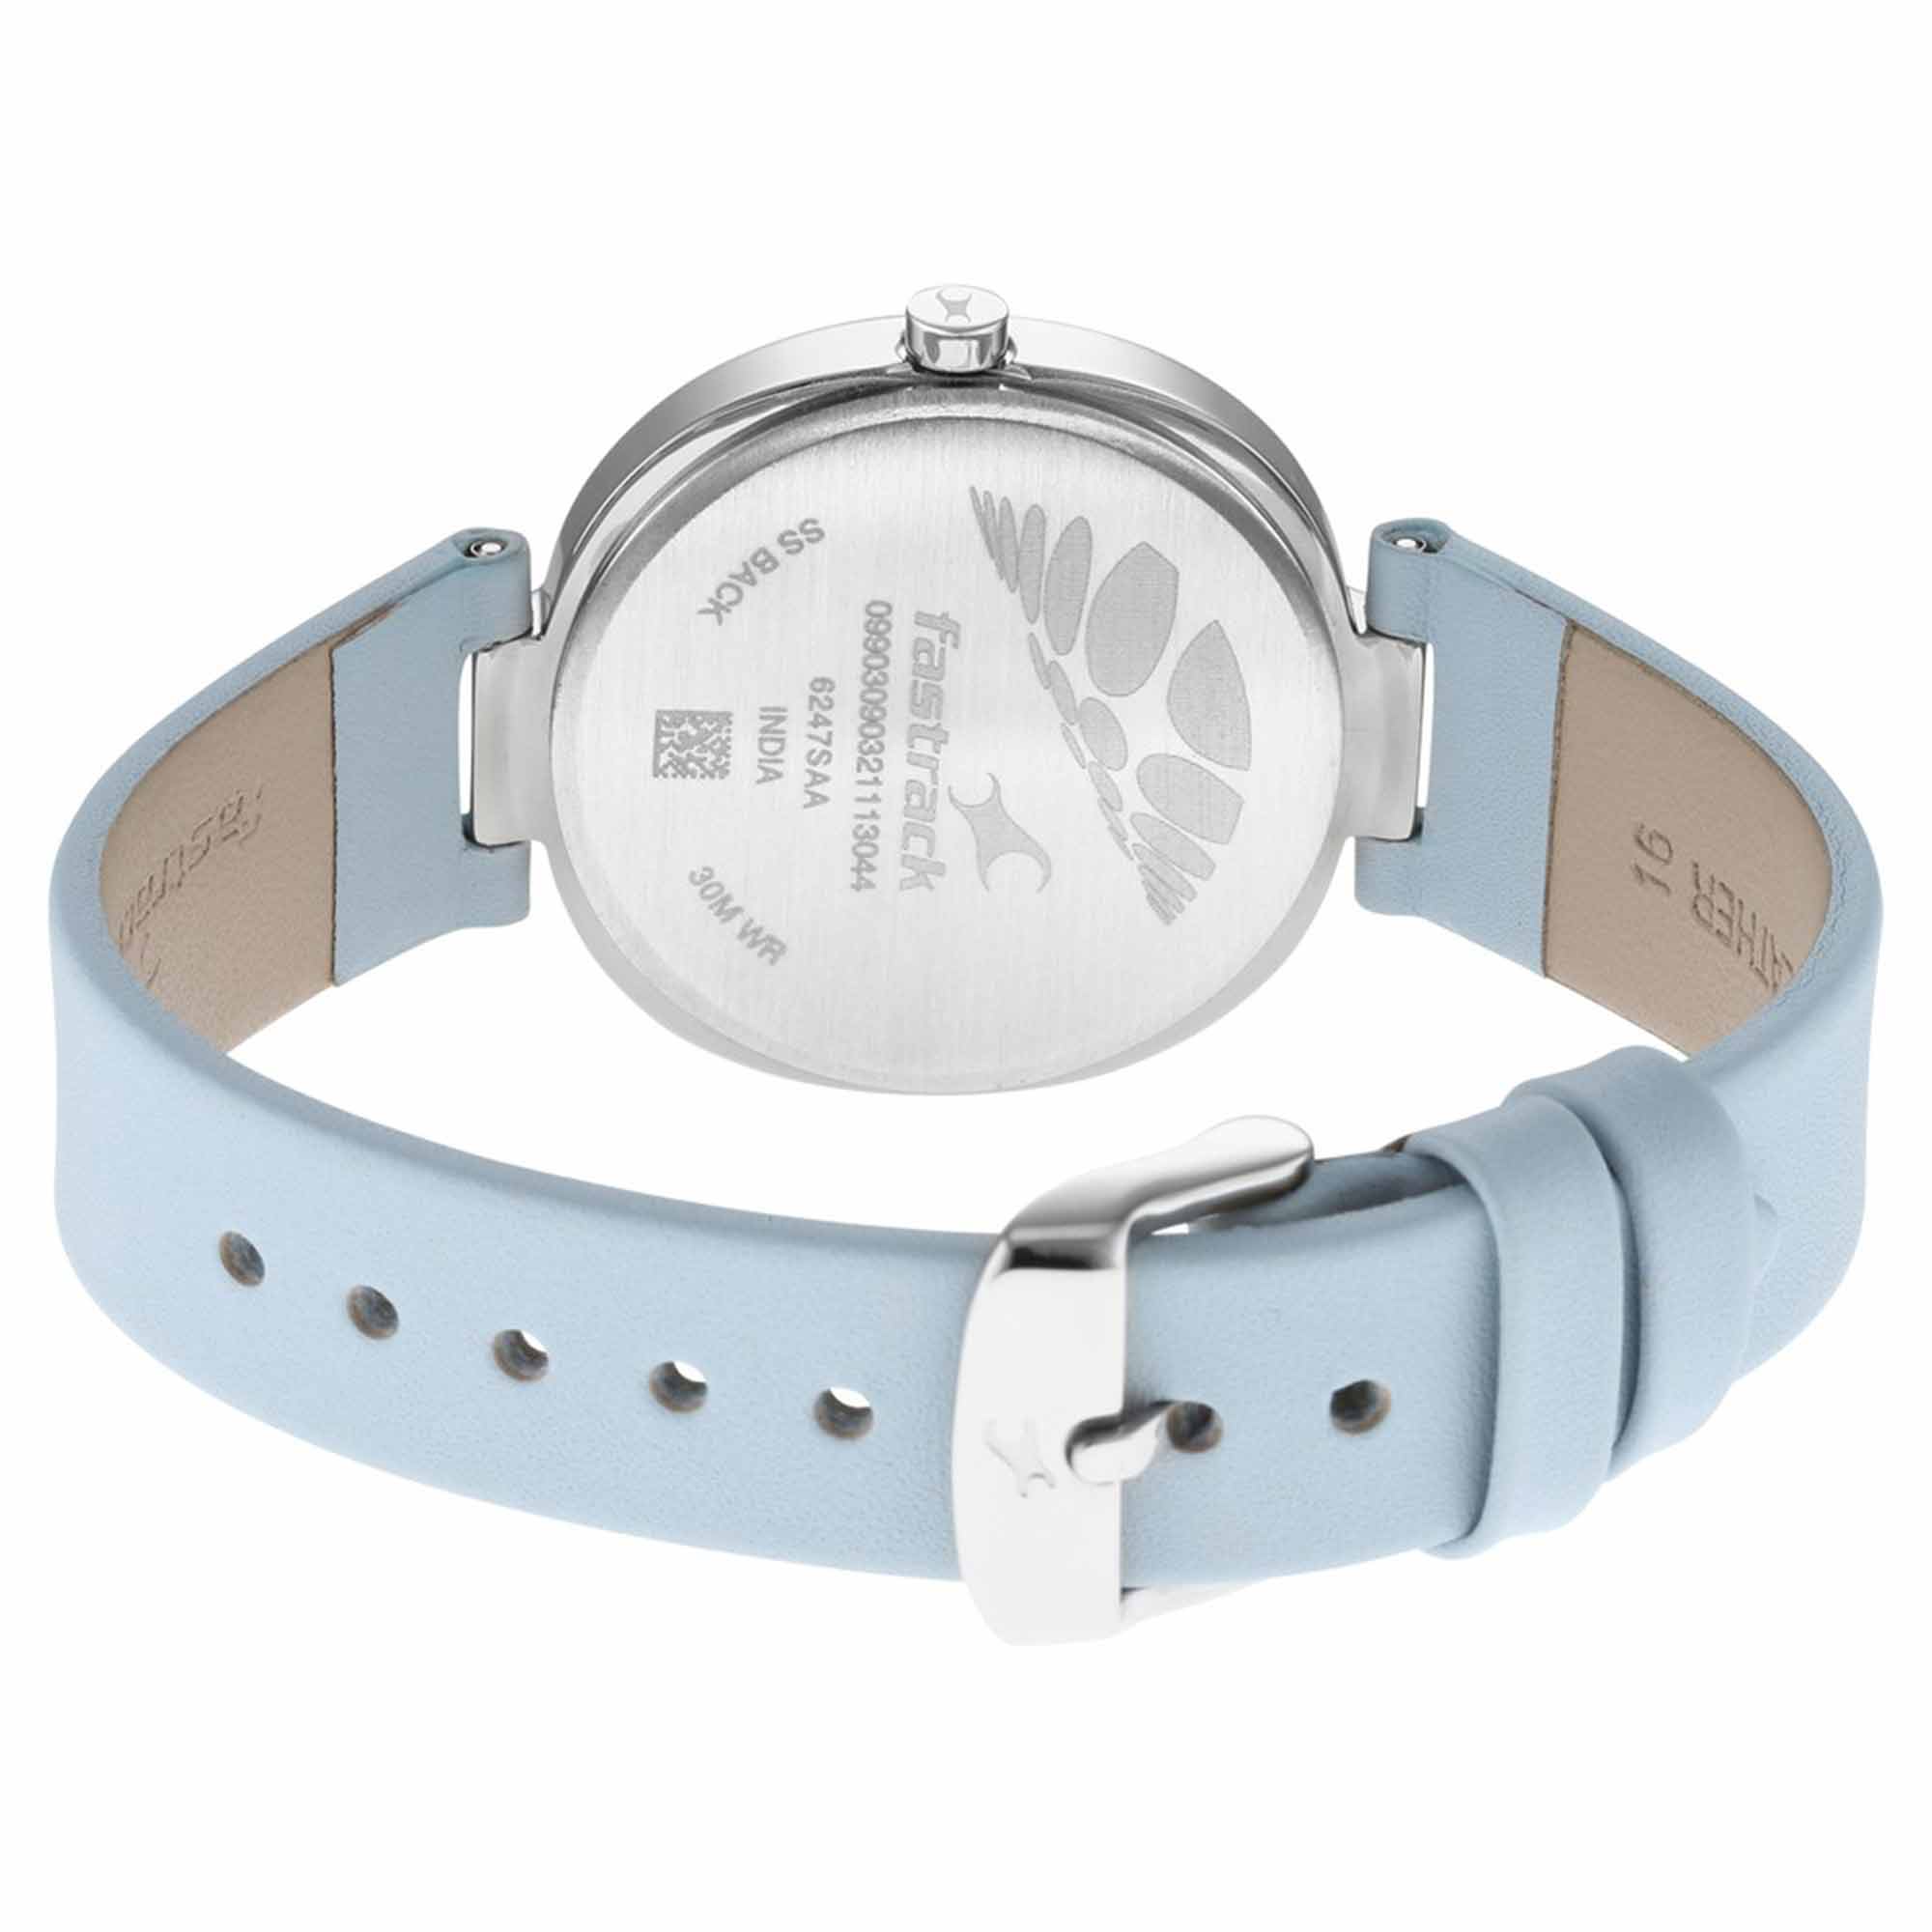 Fastrack Stunners Quartz Analog Blue Dial Leather Strap Watch for Girls